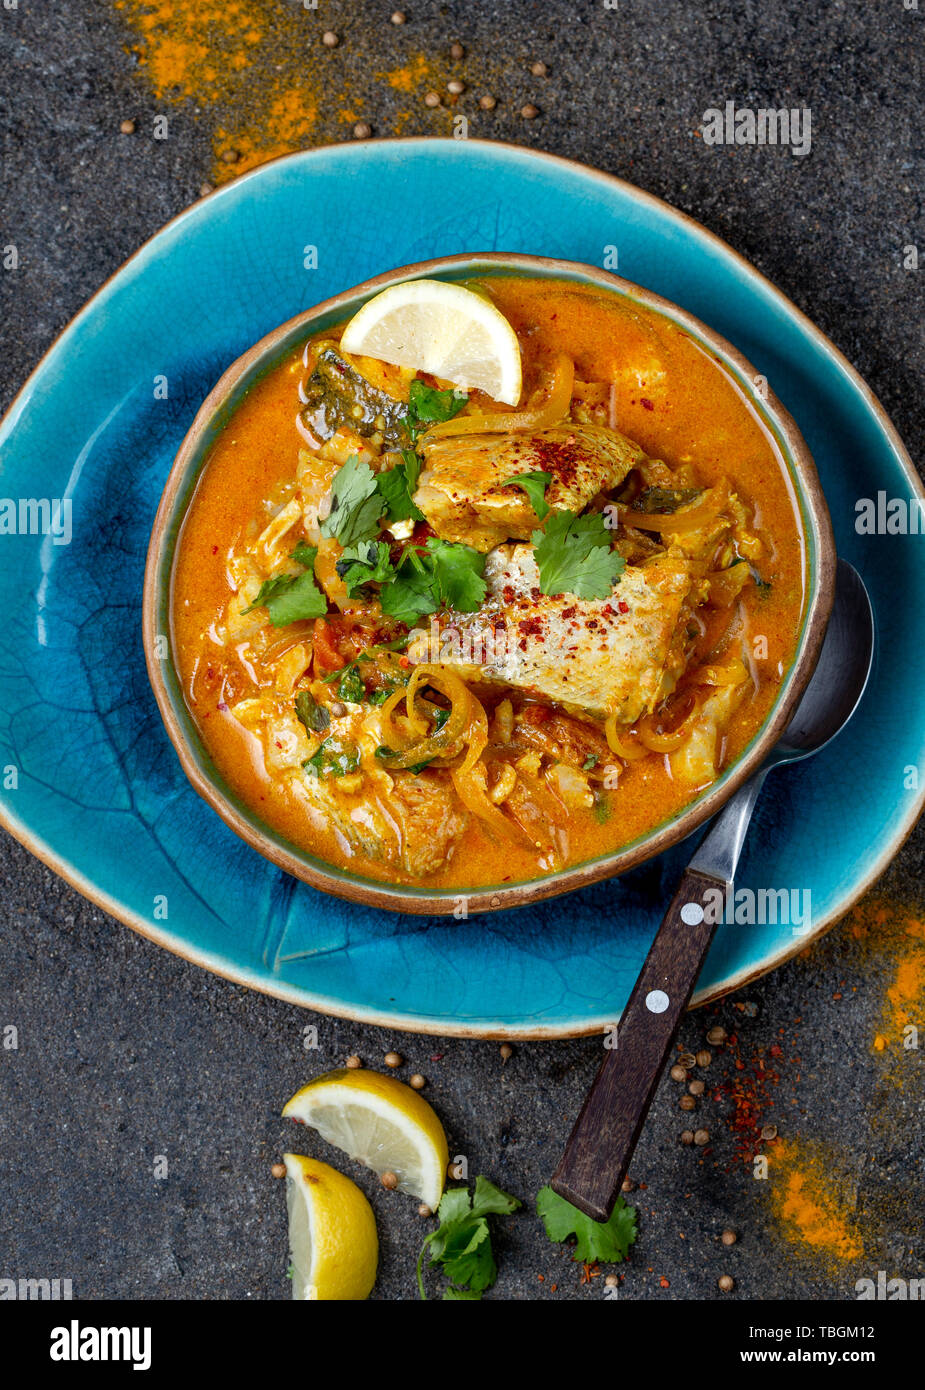 INDIAN FOOD. Traditional KERALA FISH CURRY with naan bread, gray plate, black background. Stock Photo